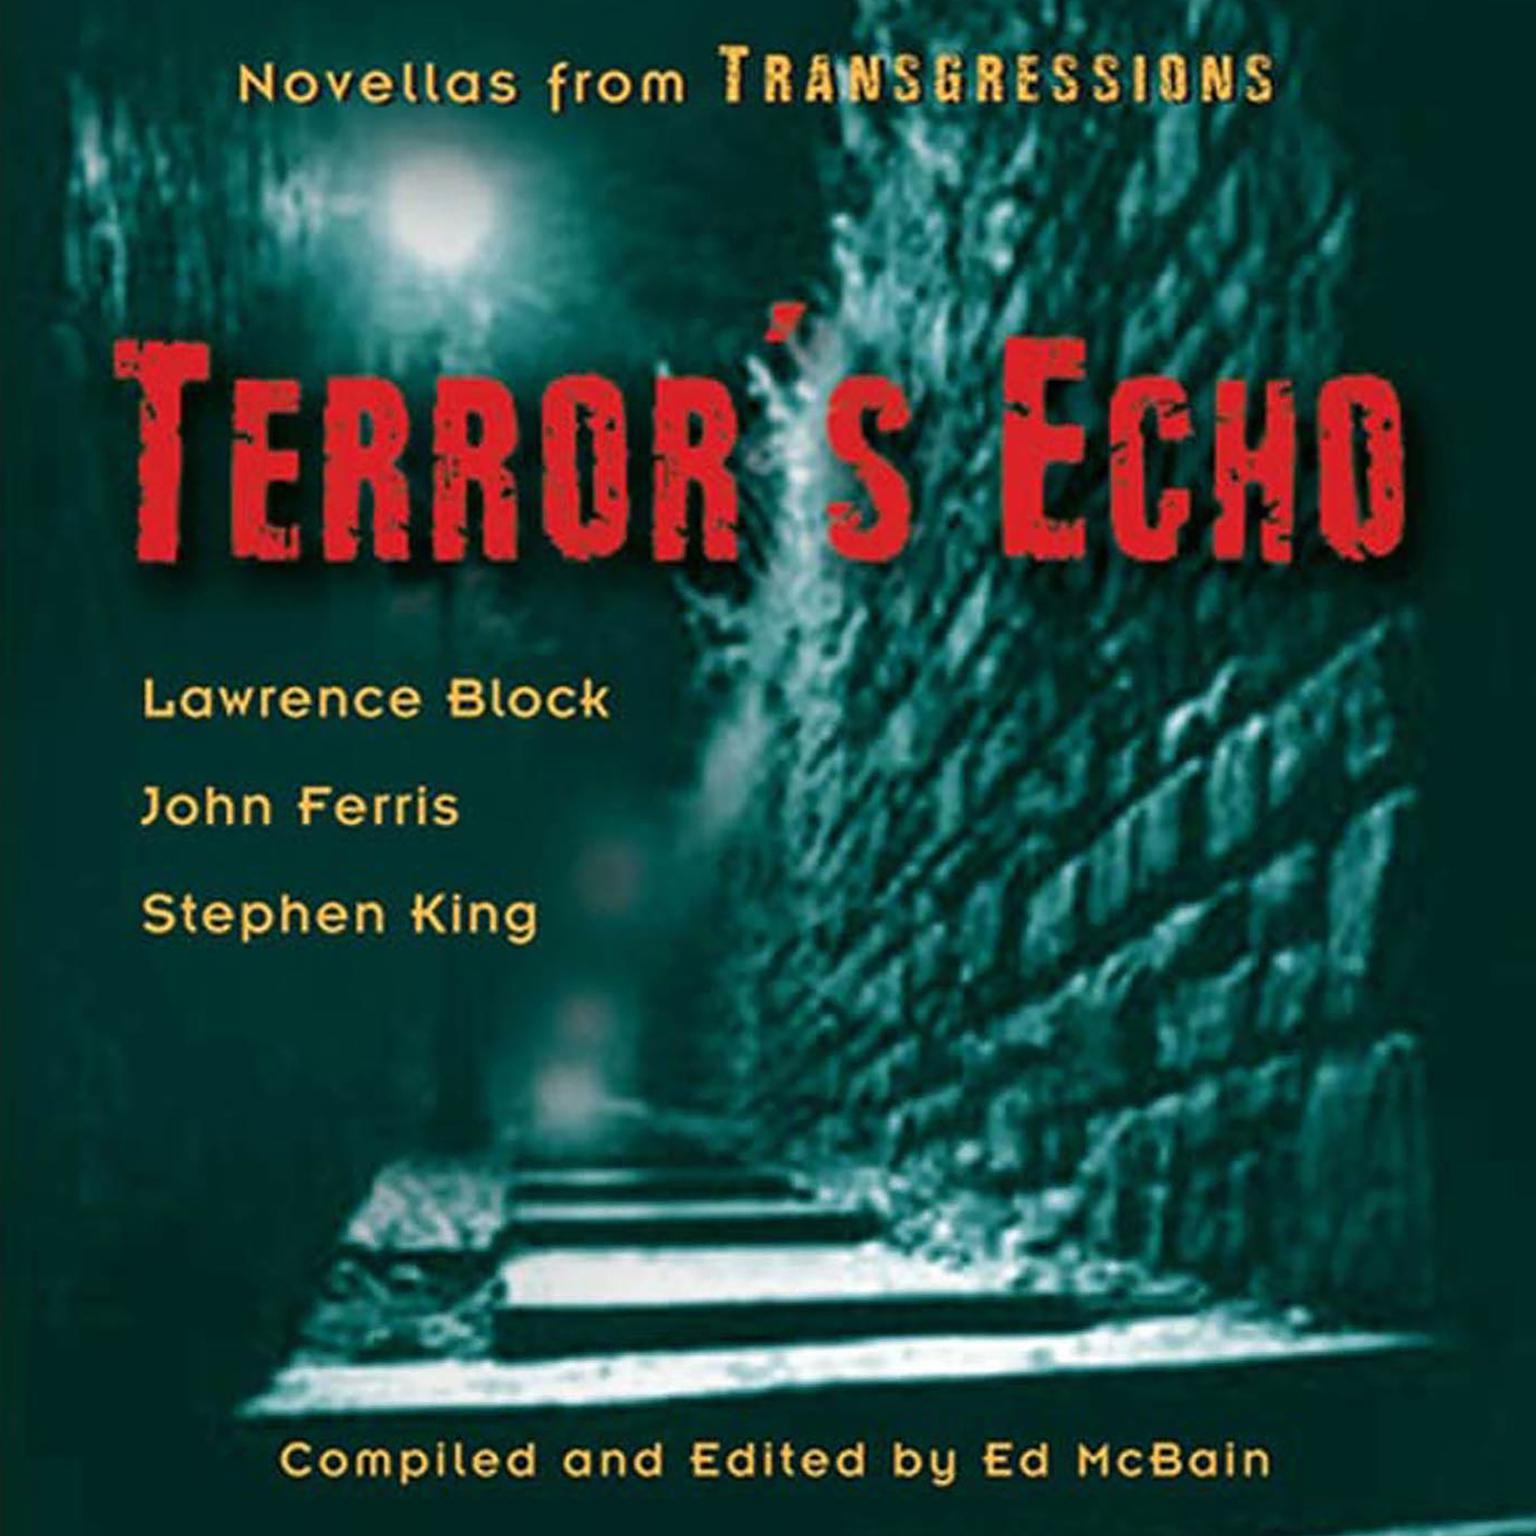 Transgressions: Terrors Echo: Three Novellas from Transgressions Audiobook, by Stephen King